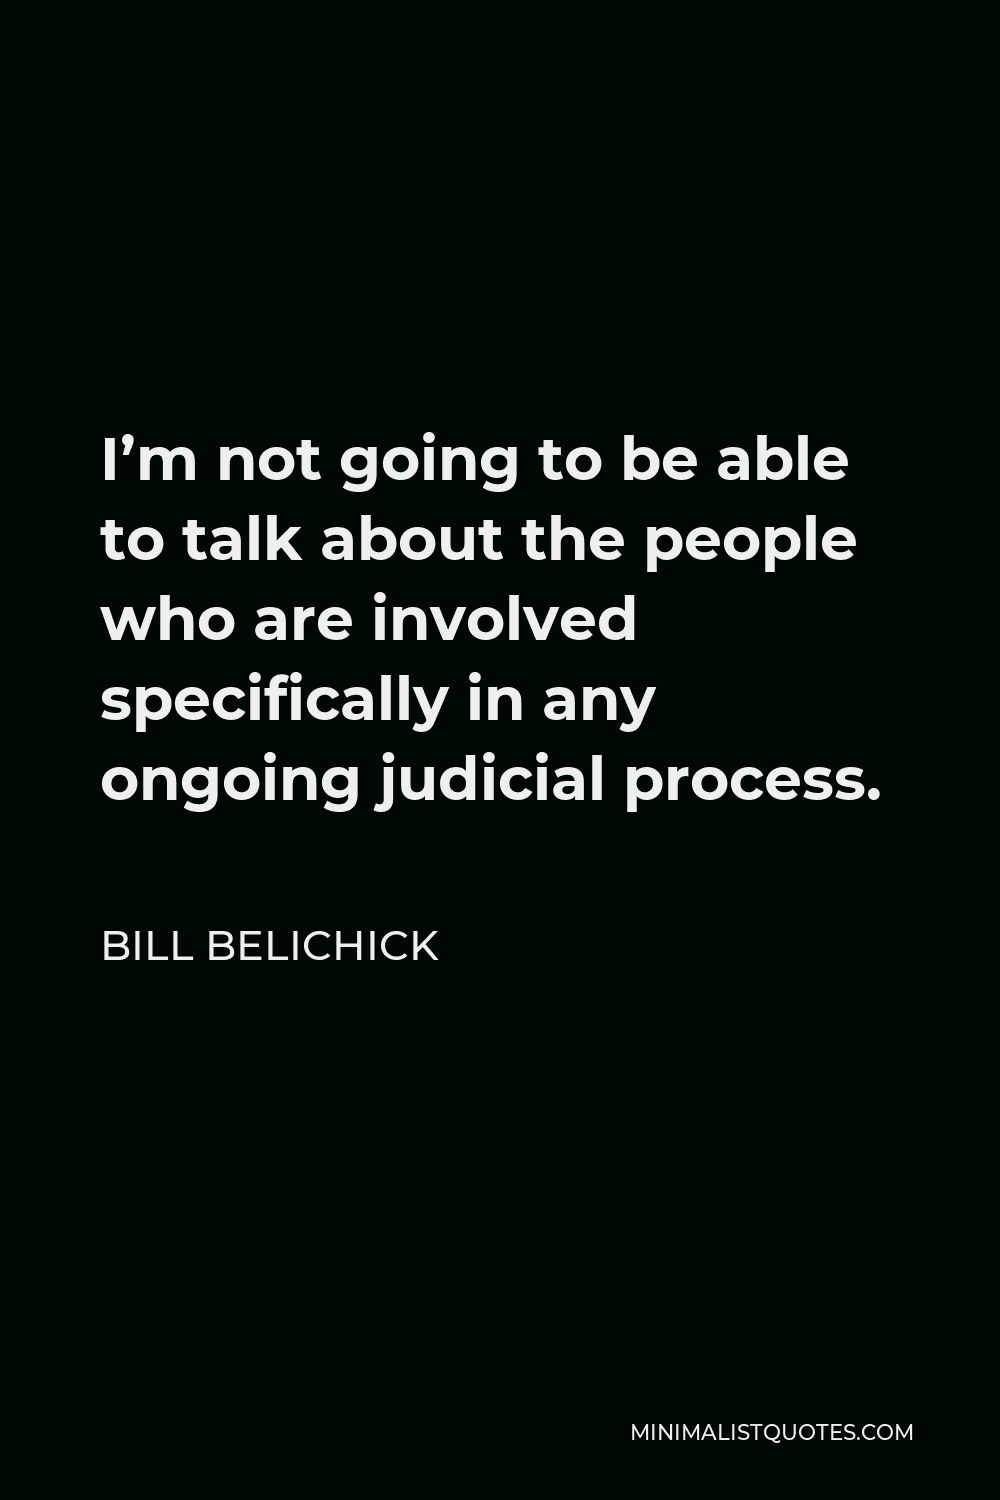 Bill Belichick Quote - I’m not going to be able to talk about the people who are involved specifically in any ongoing judicial process.